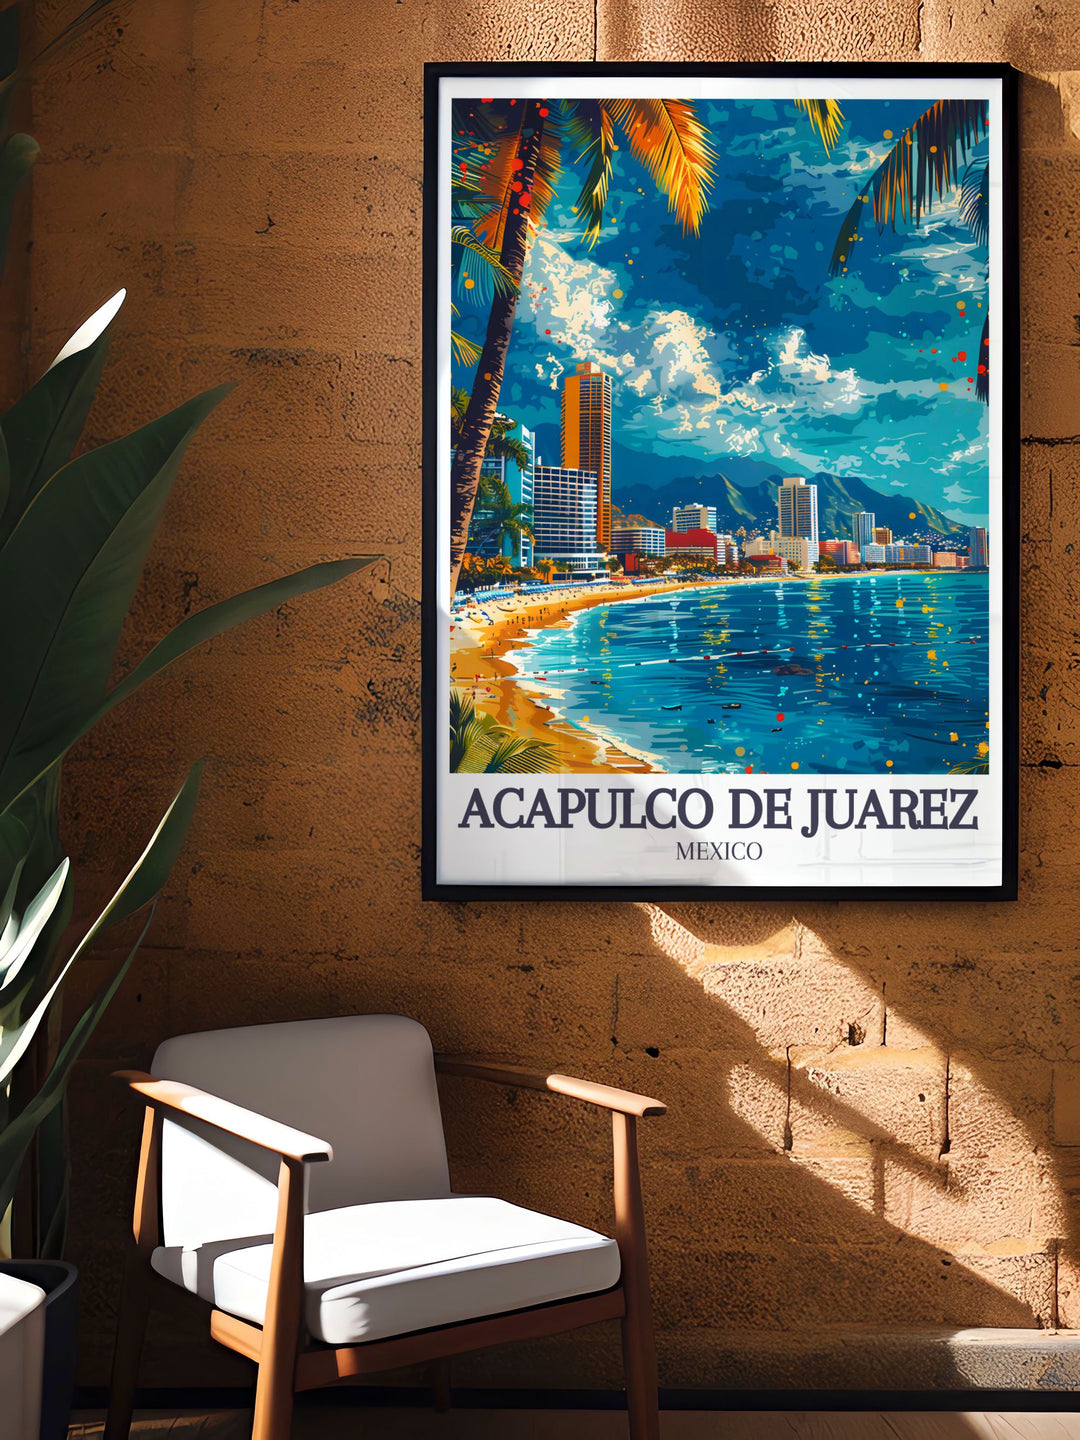 The iconic Las Torres Gemelas and the bustling energy of Acapulco de Juárez are featured in this city print, celebrating Mexicos coastal gem.